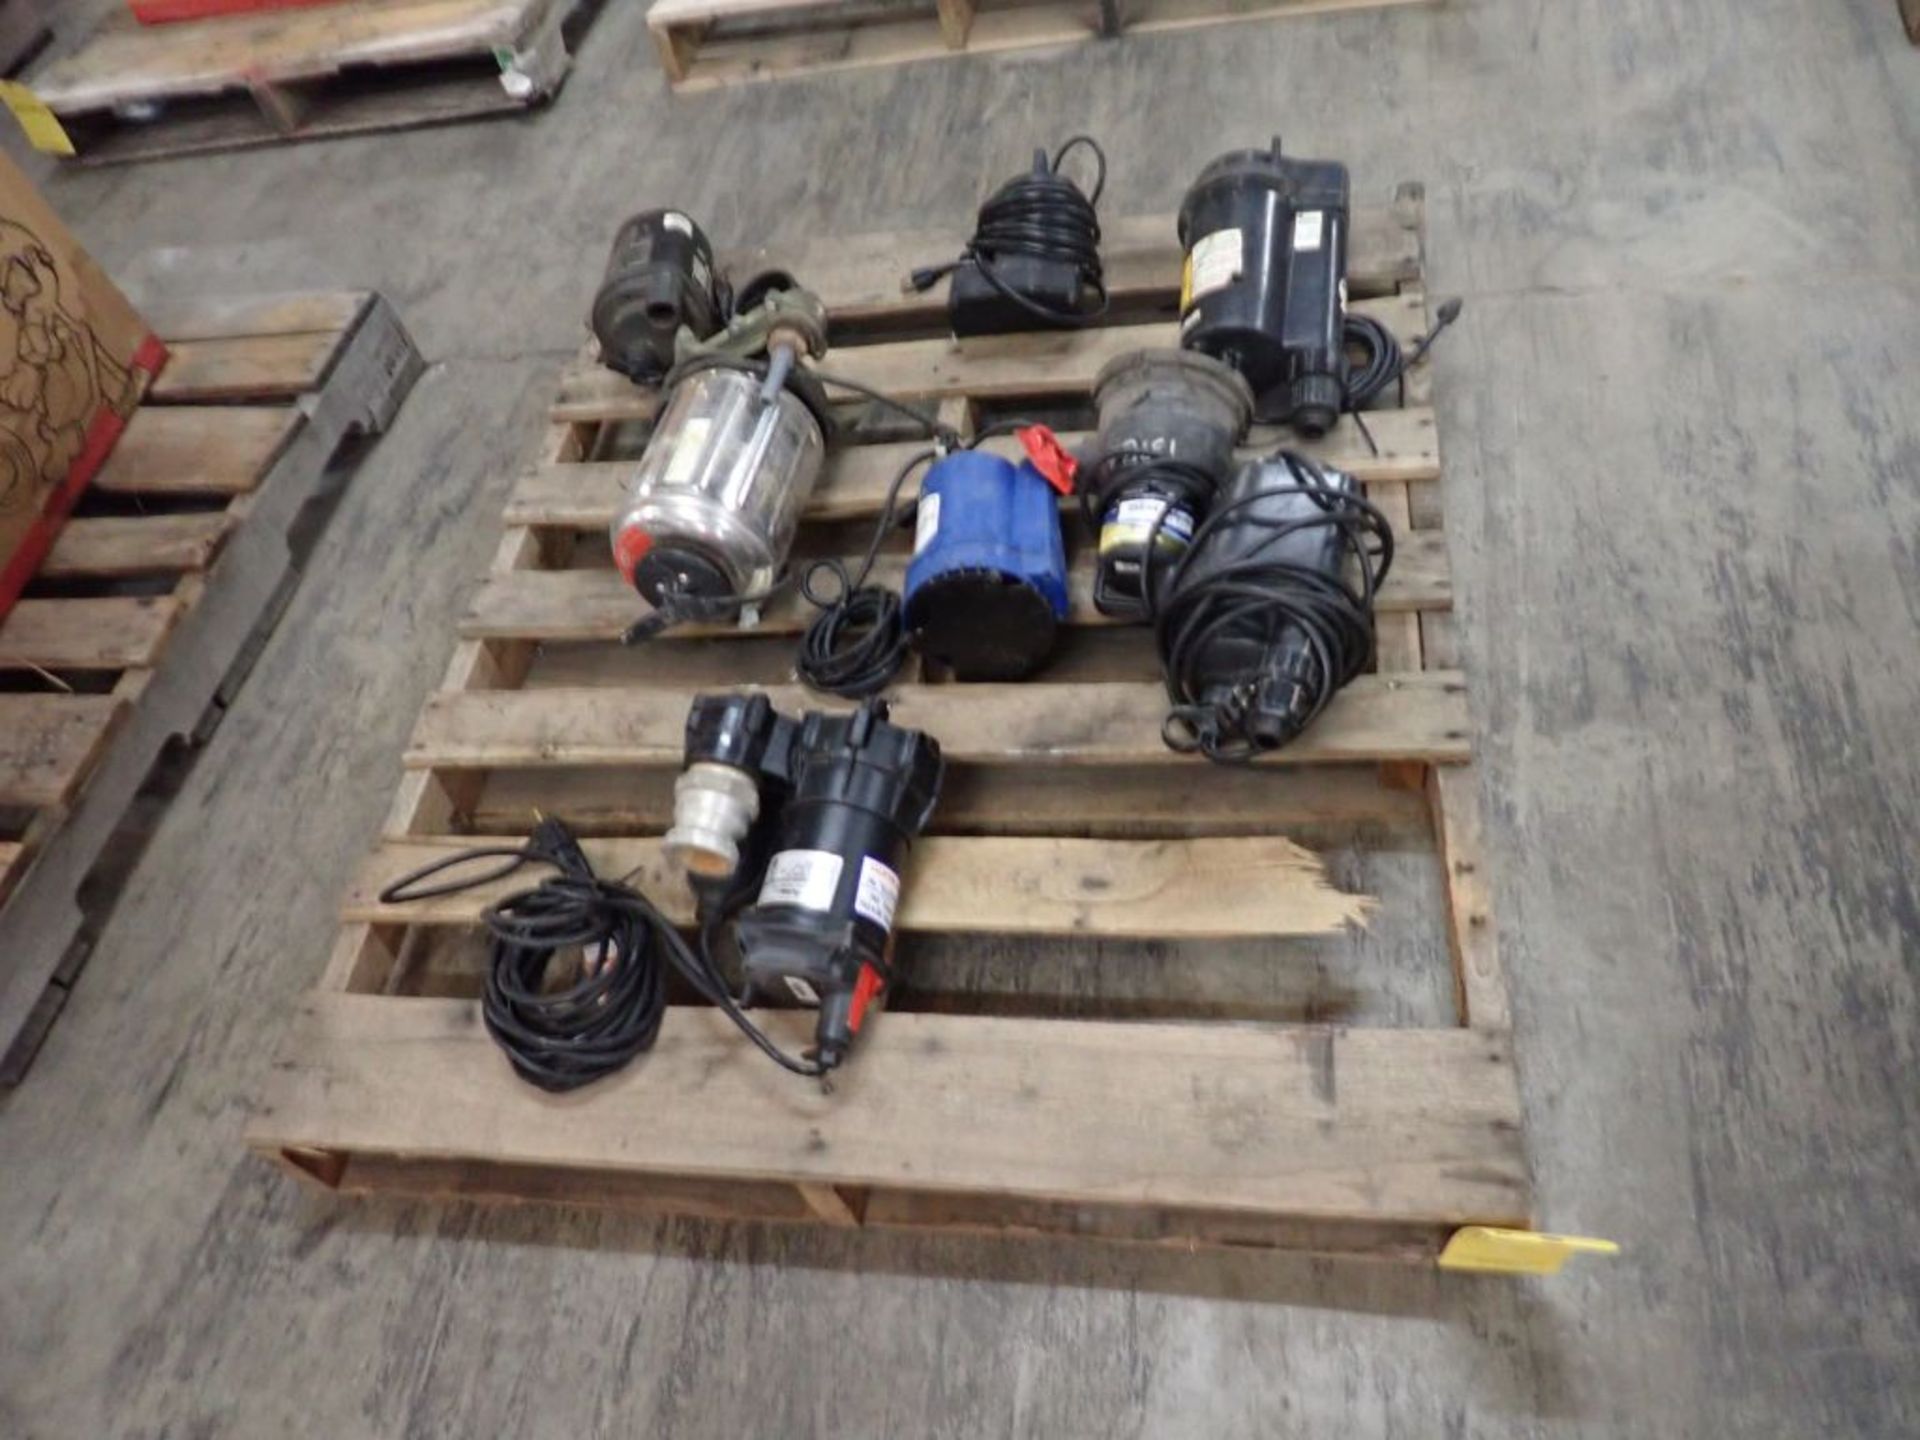 Lot of Assorted Submersible Pumps - Brands Include: DRS; Northern Industrial; Simer; Tag: 215079